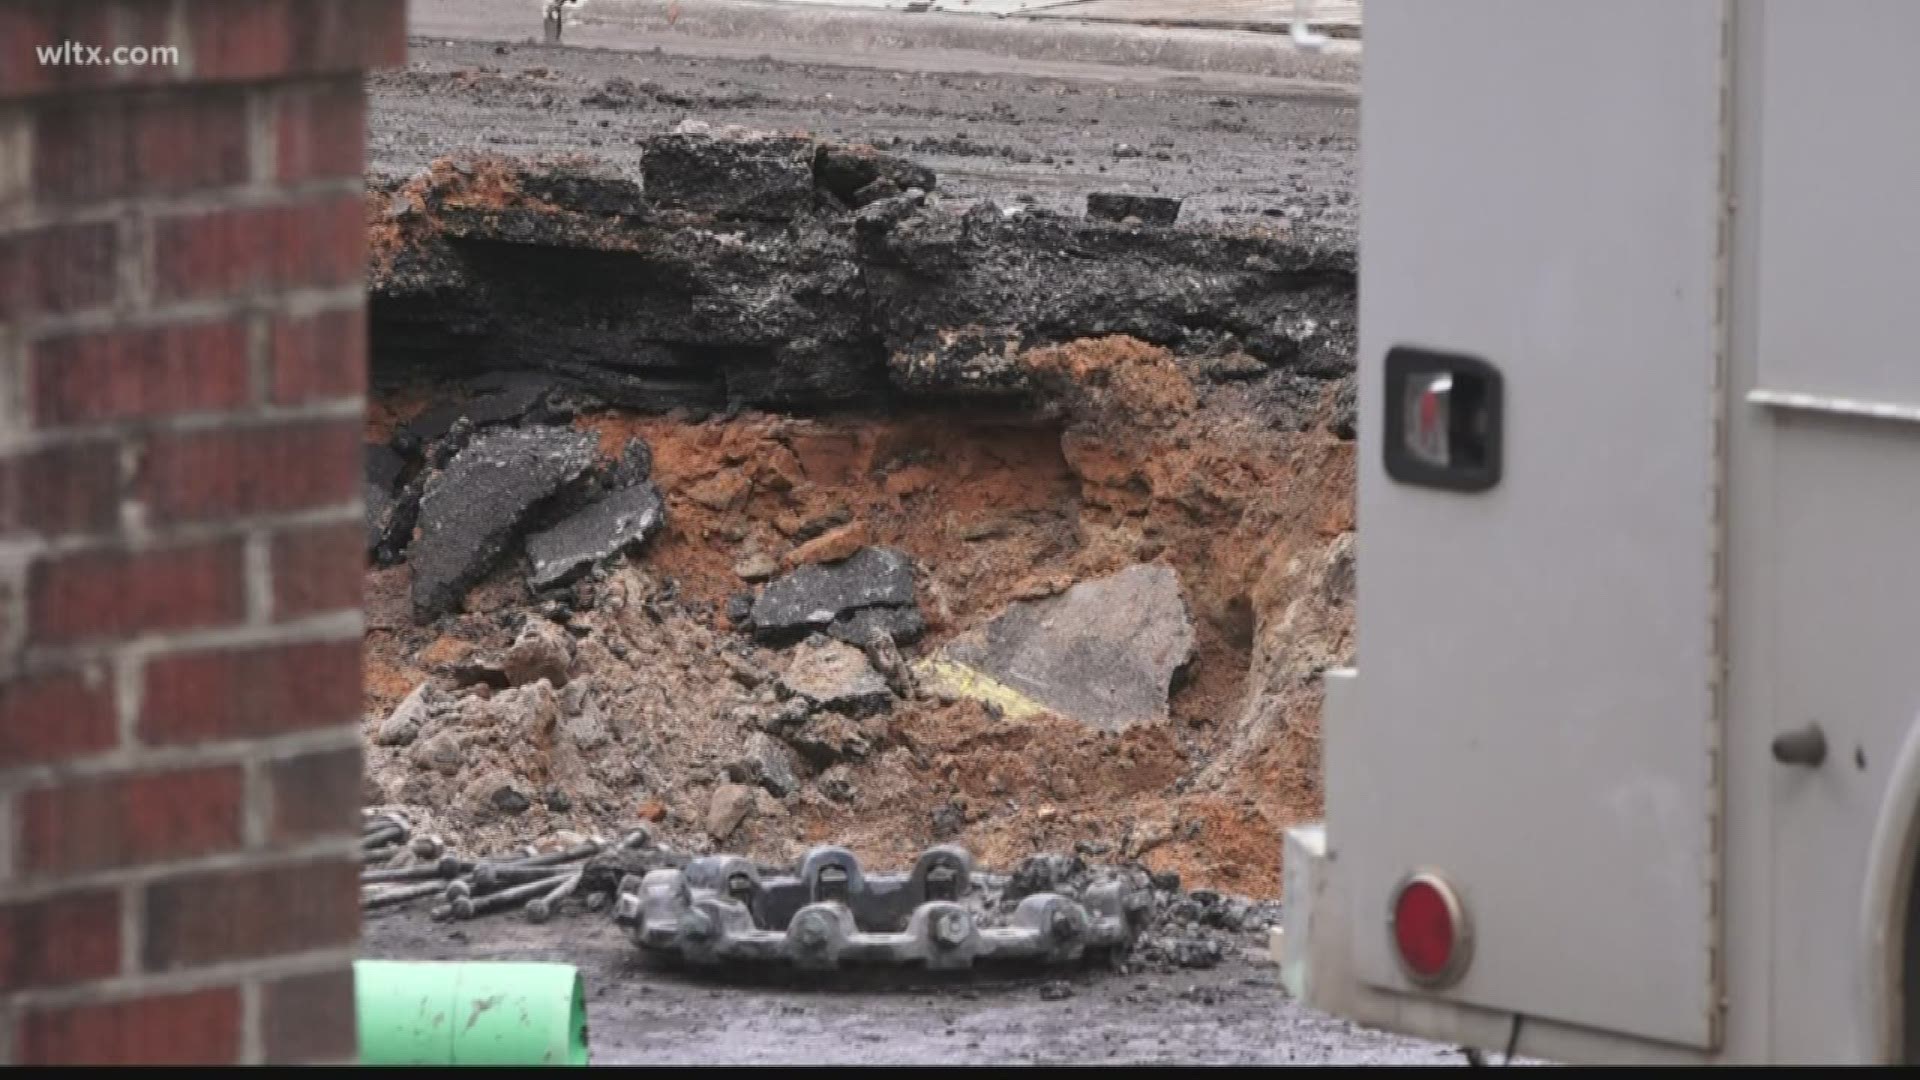 The sinkhole will take days to fix and a boil water advisory is in effect for the area.